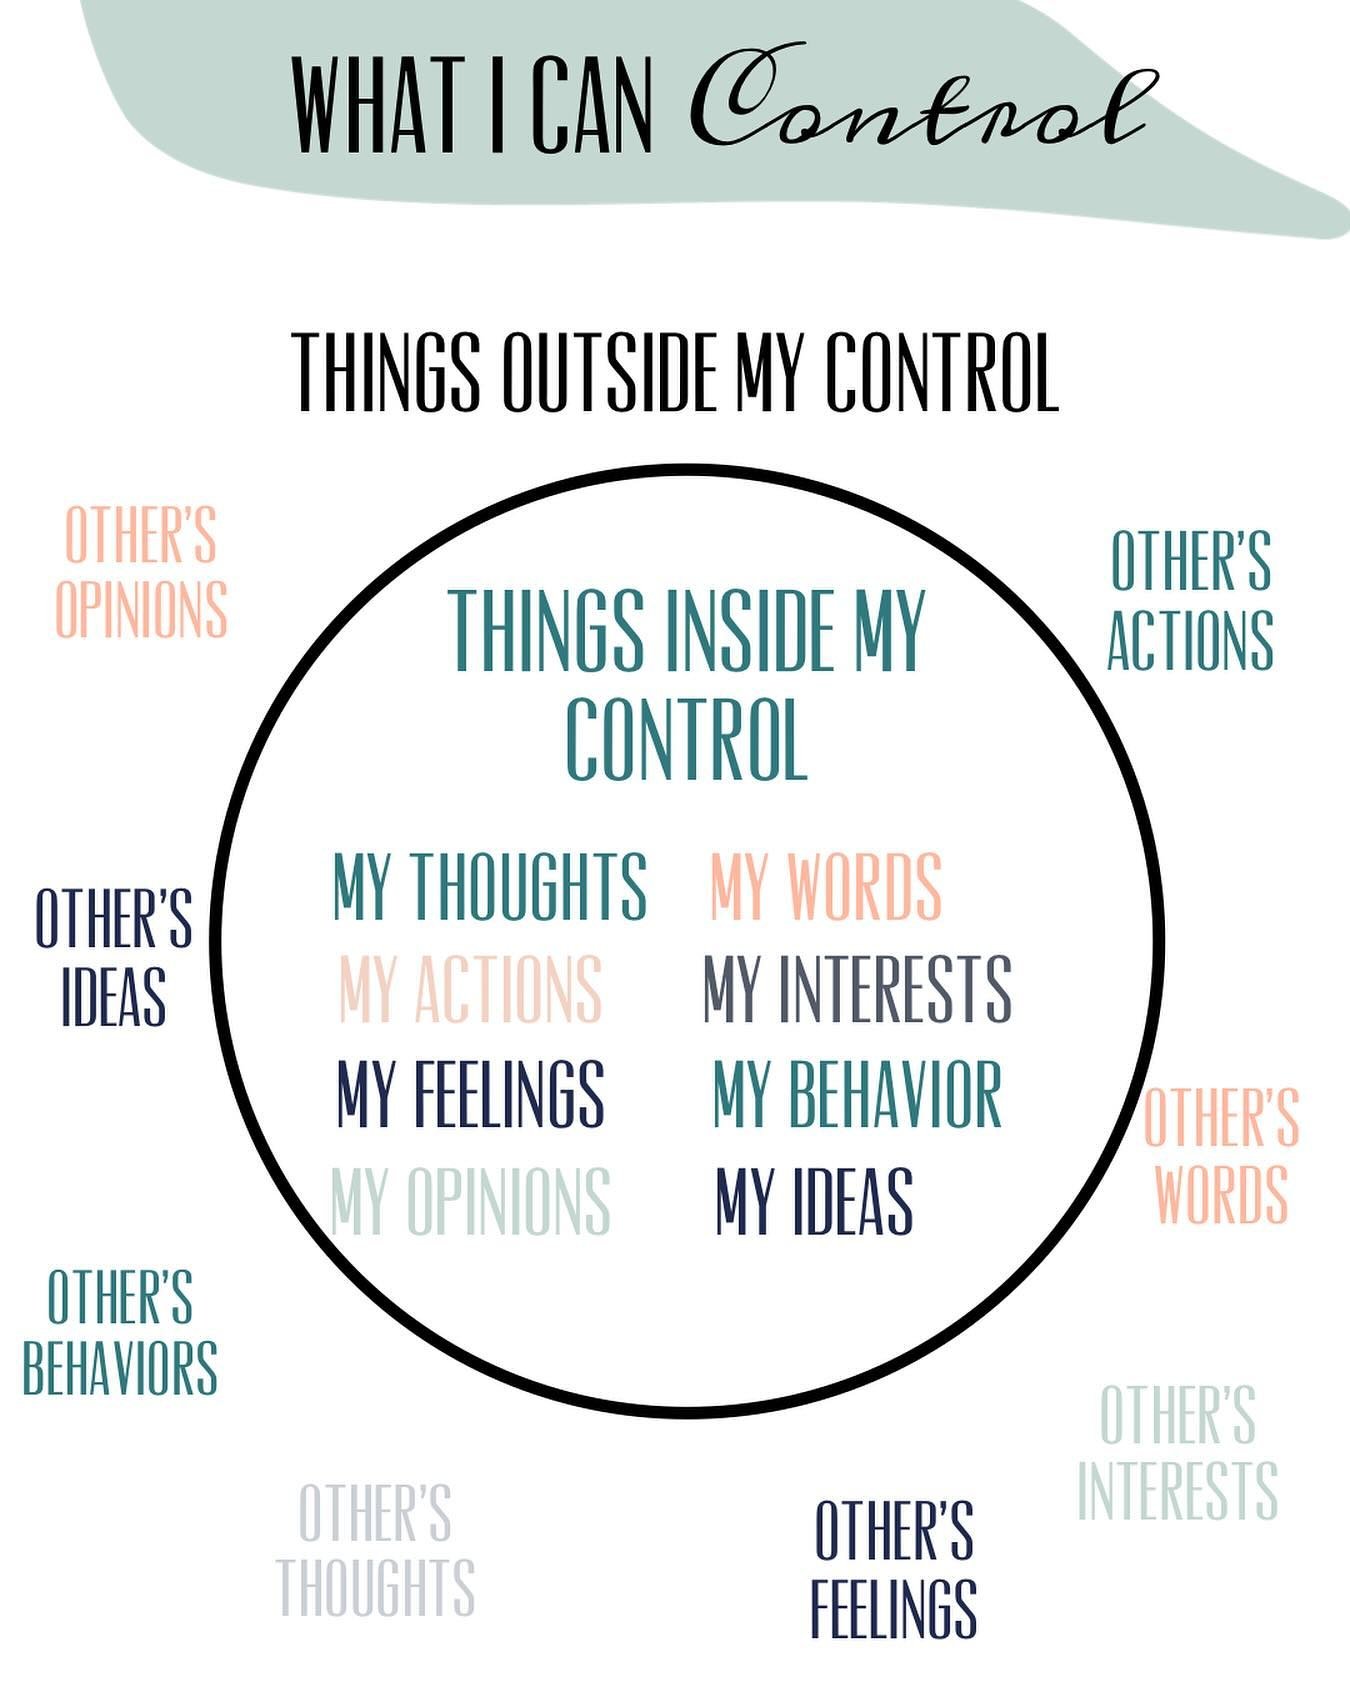 A great tool to use to help decrease anxiety and worry is to focus on what you CAN control not on what you can&rsquo;t control. When we focus on what we can control, our thoughts empower us and then trigger positive emotions.